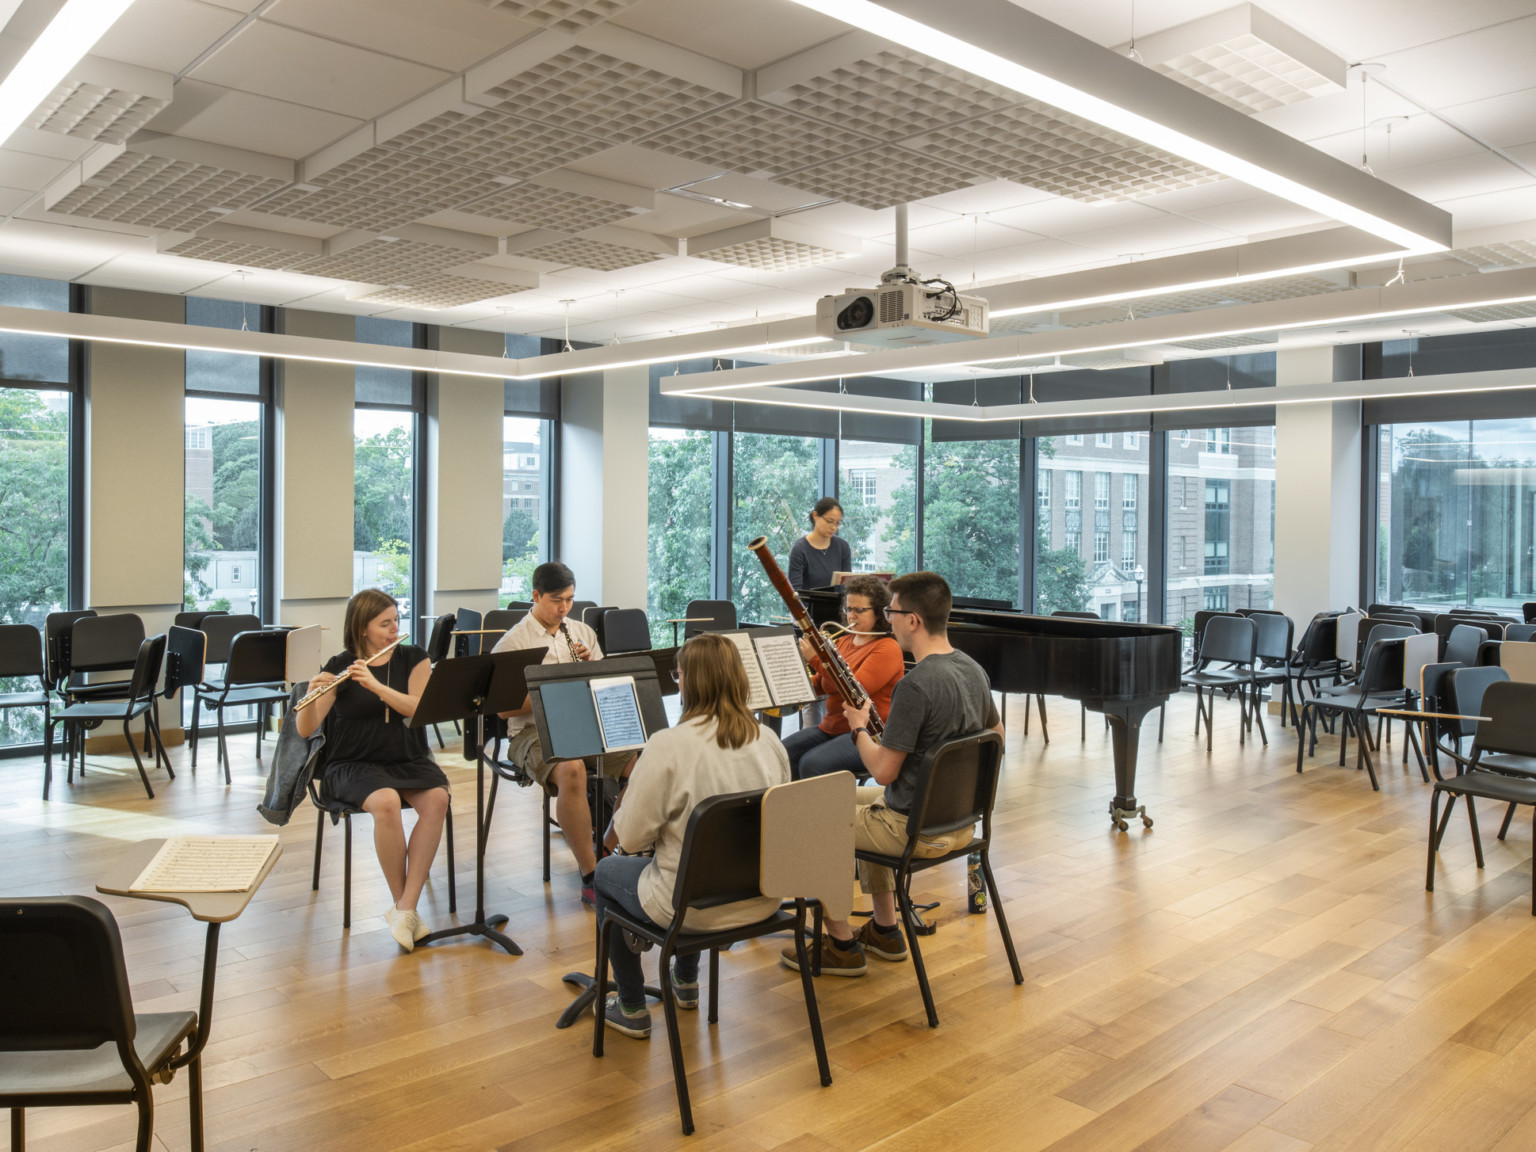 Students practicing in corner upper-level room with floor to ceiling windows and geometric lighting